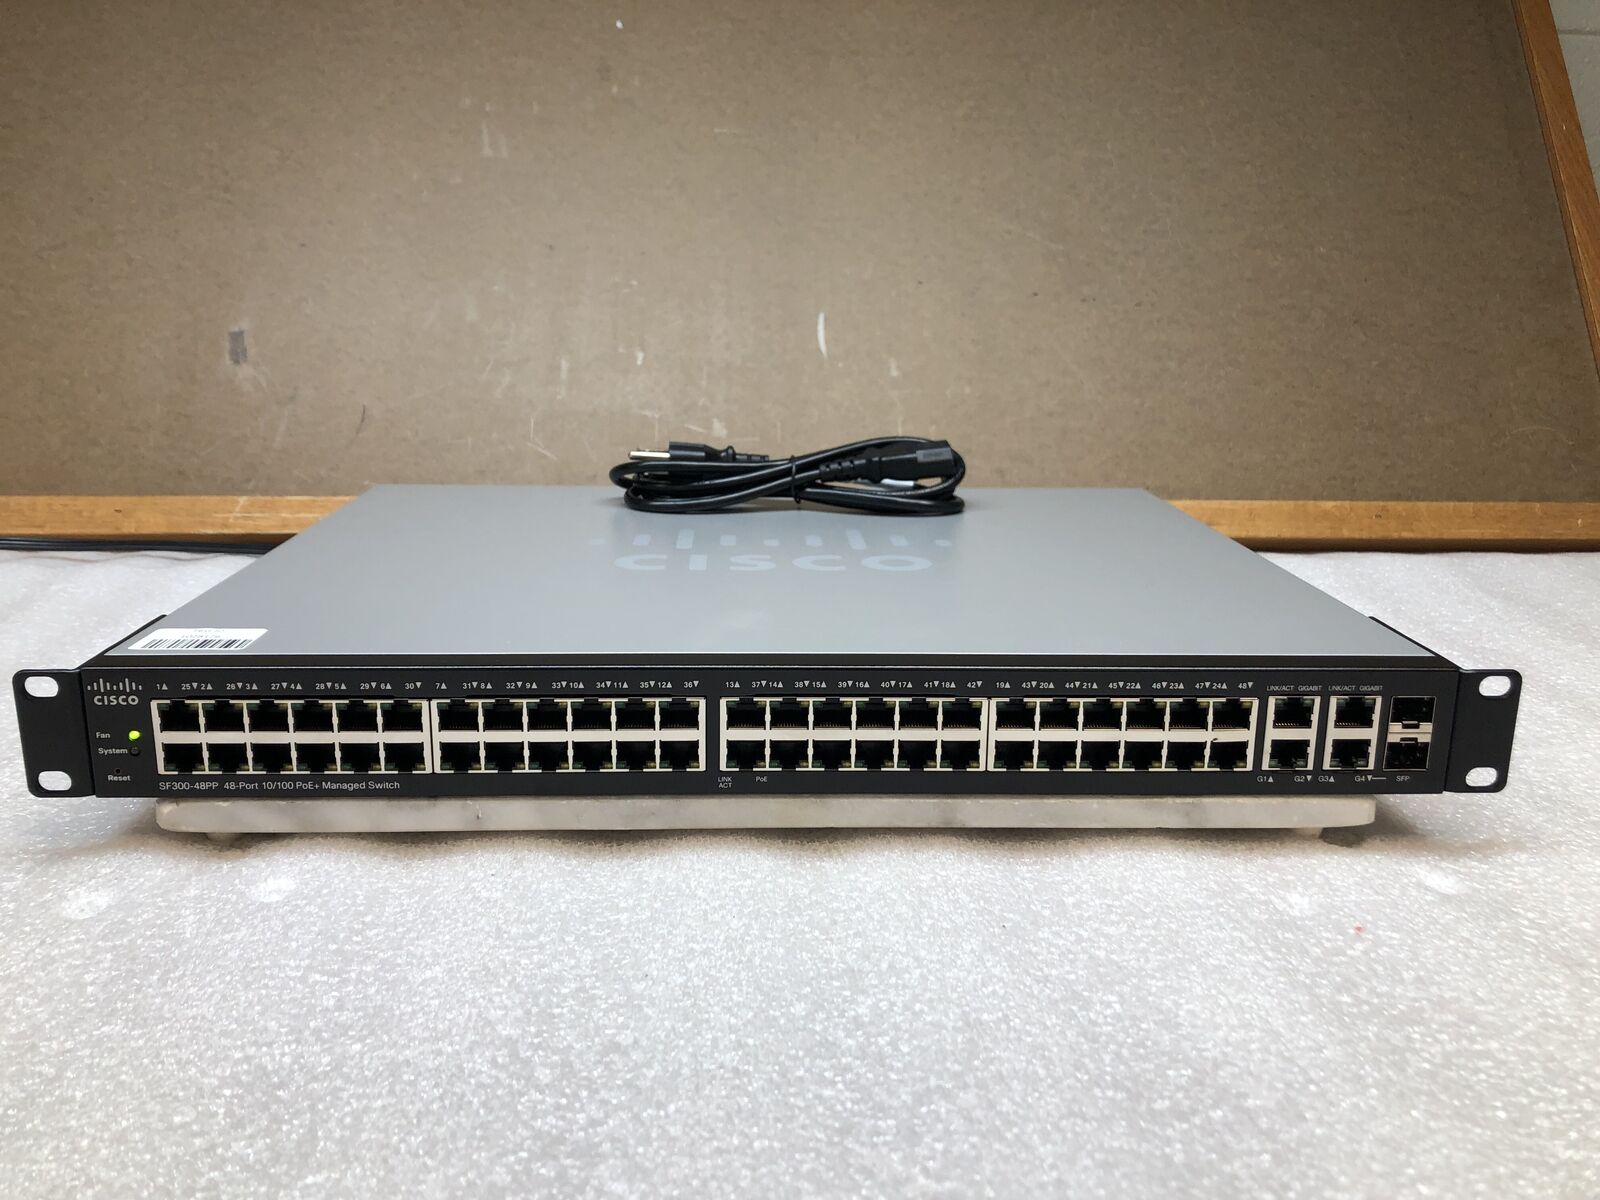 Cisco SF300-48PP 10/100 PoE+ Managed Network Switch, w/RACK EARS -TESTED/RESET